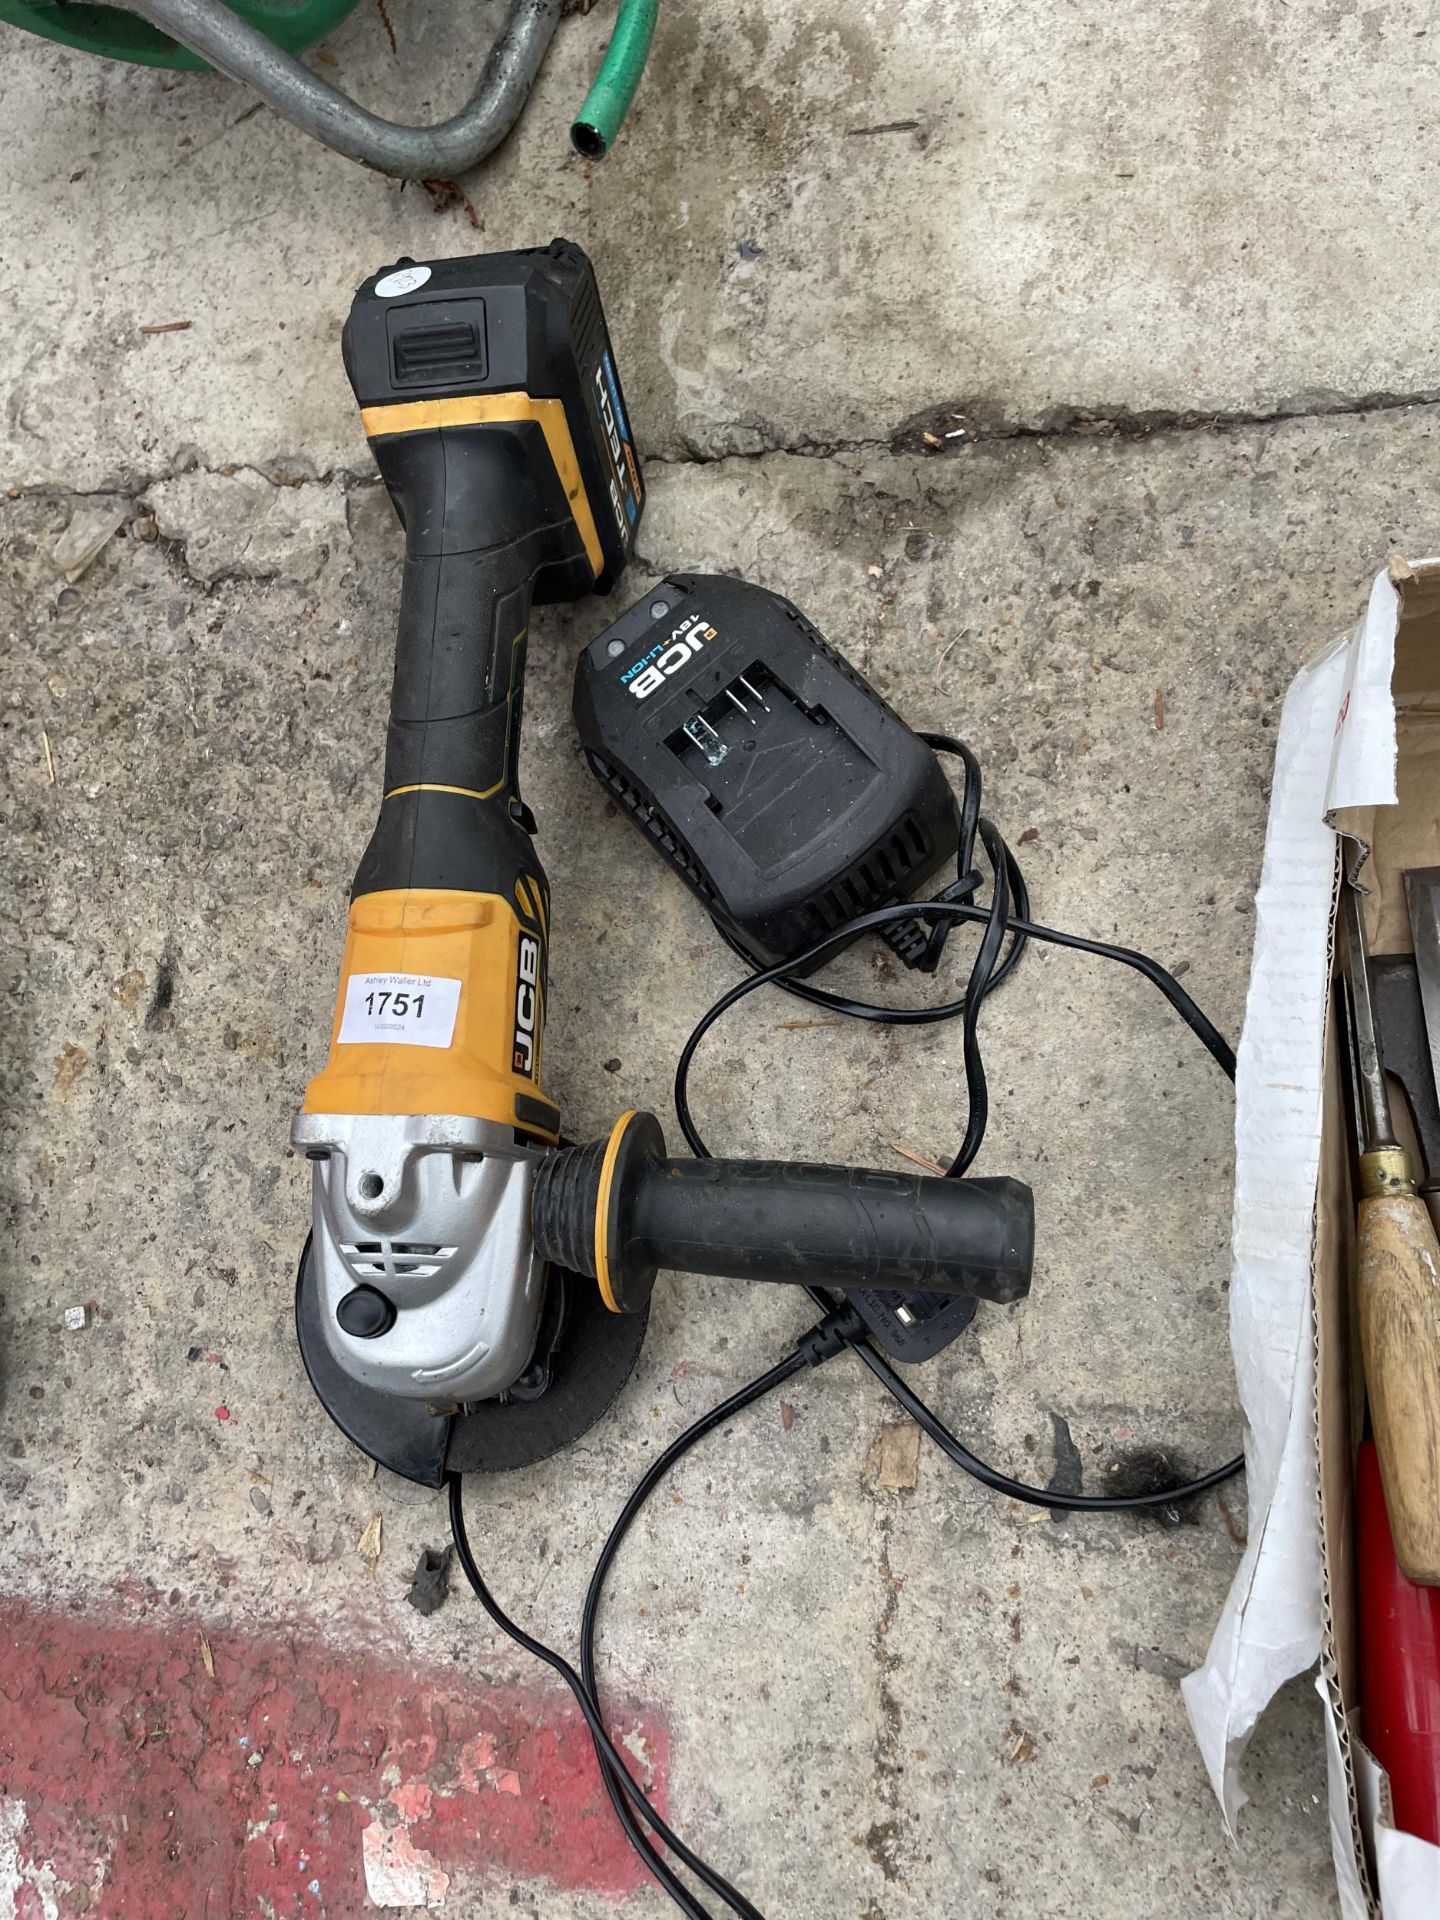 A BATTERY POWERED JCB ANGLE GRINDER WITH CHARGER